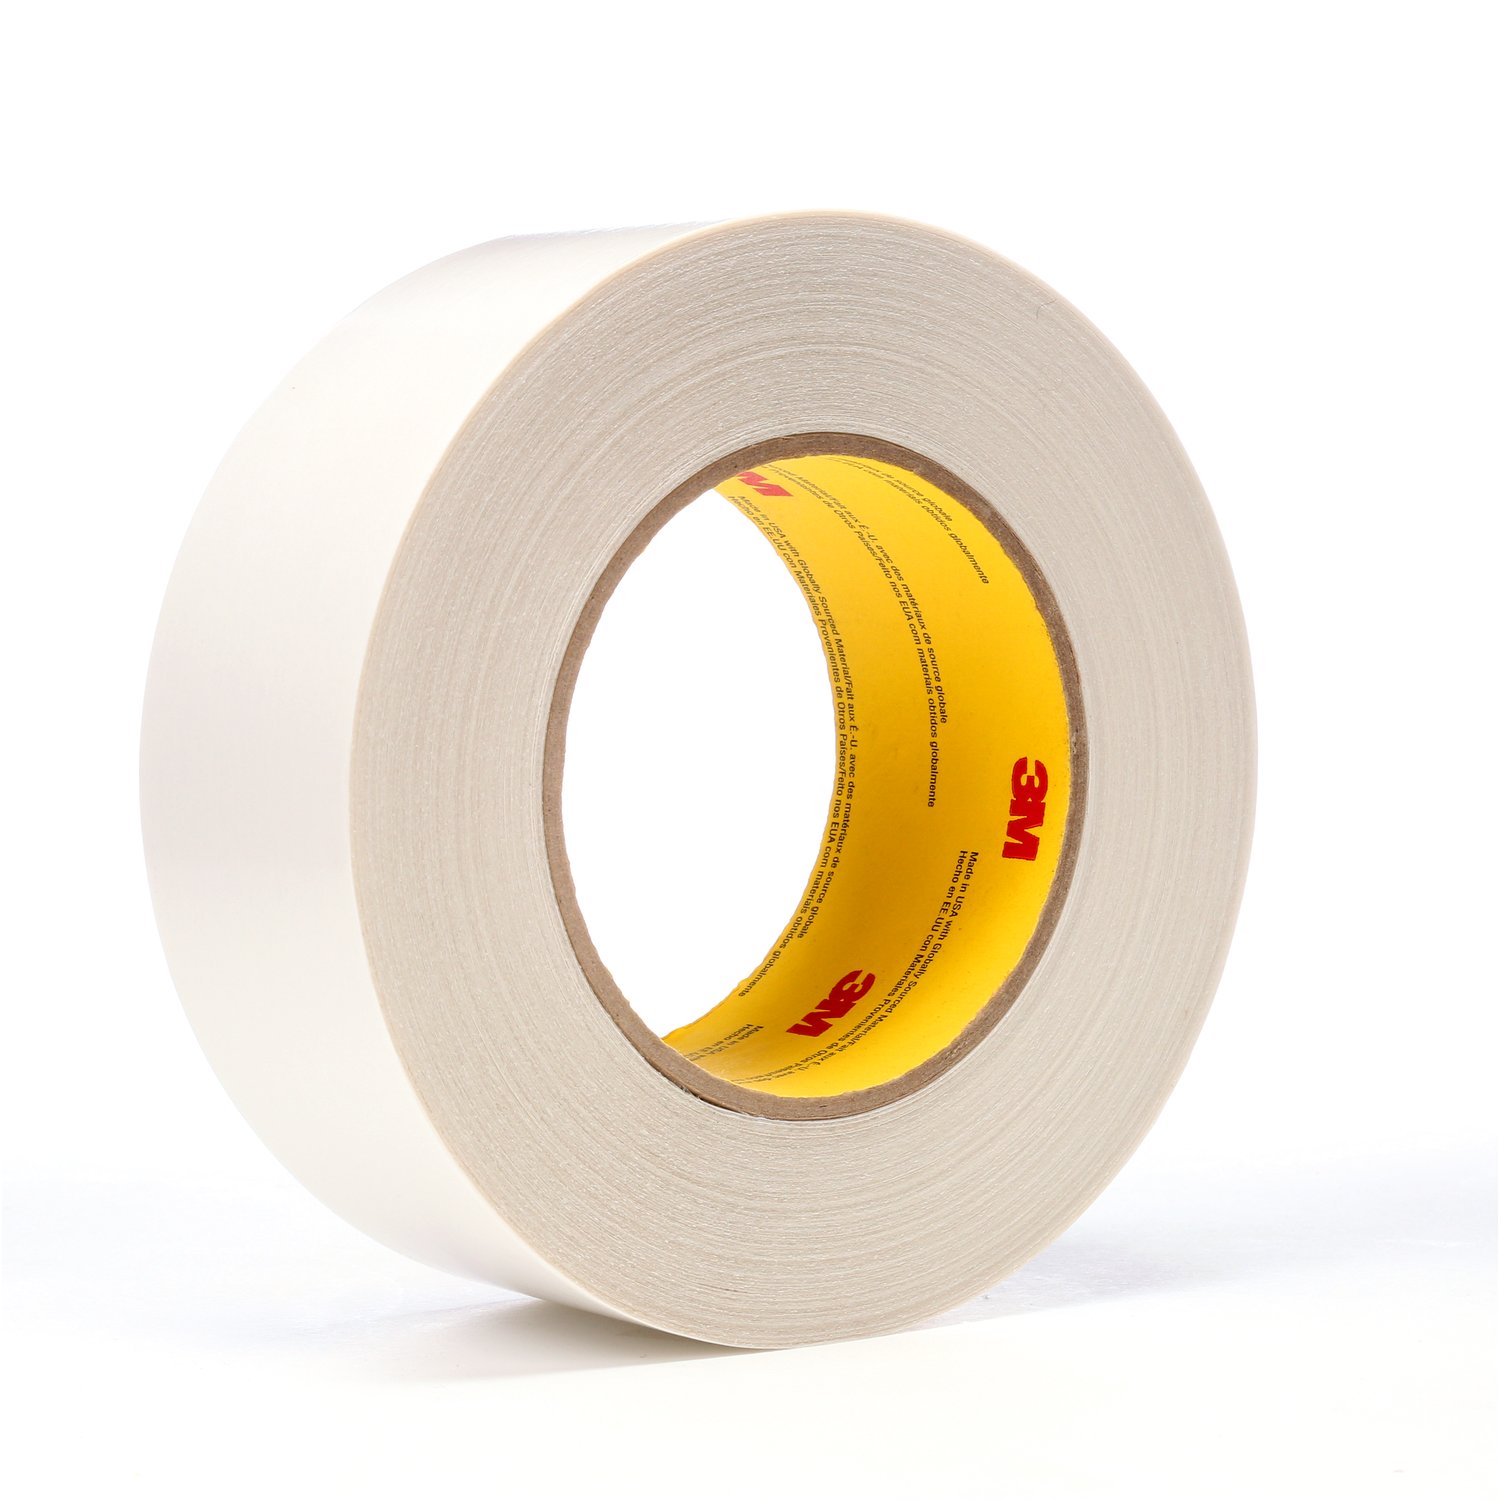 7000029048 - 3M Double Coated Tape 9737, Clear, 48 mm x 55 m, 3.5 mil, 24 rolls per
case